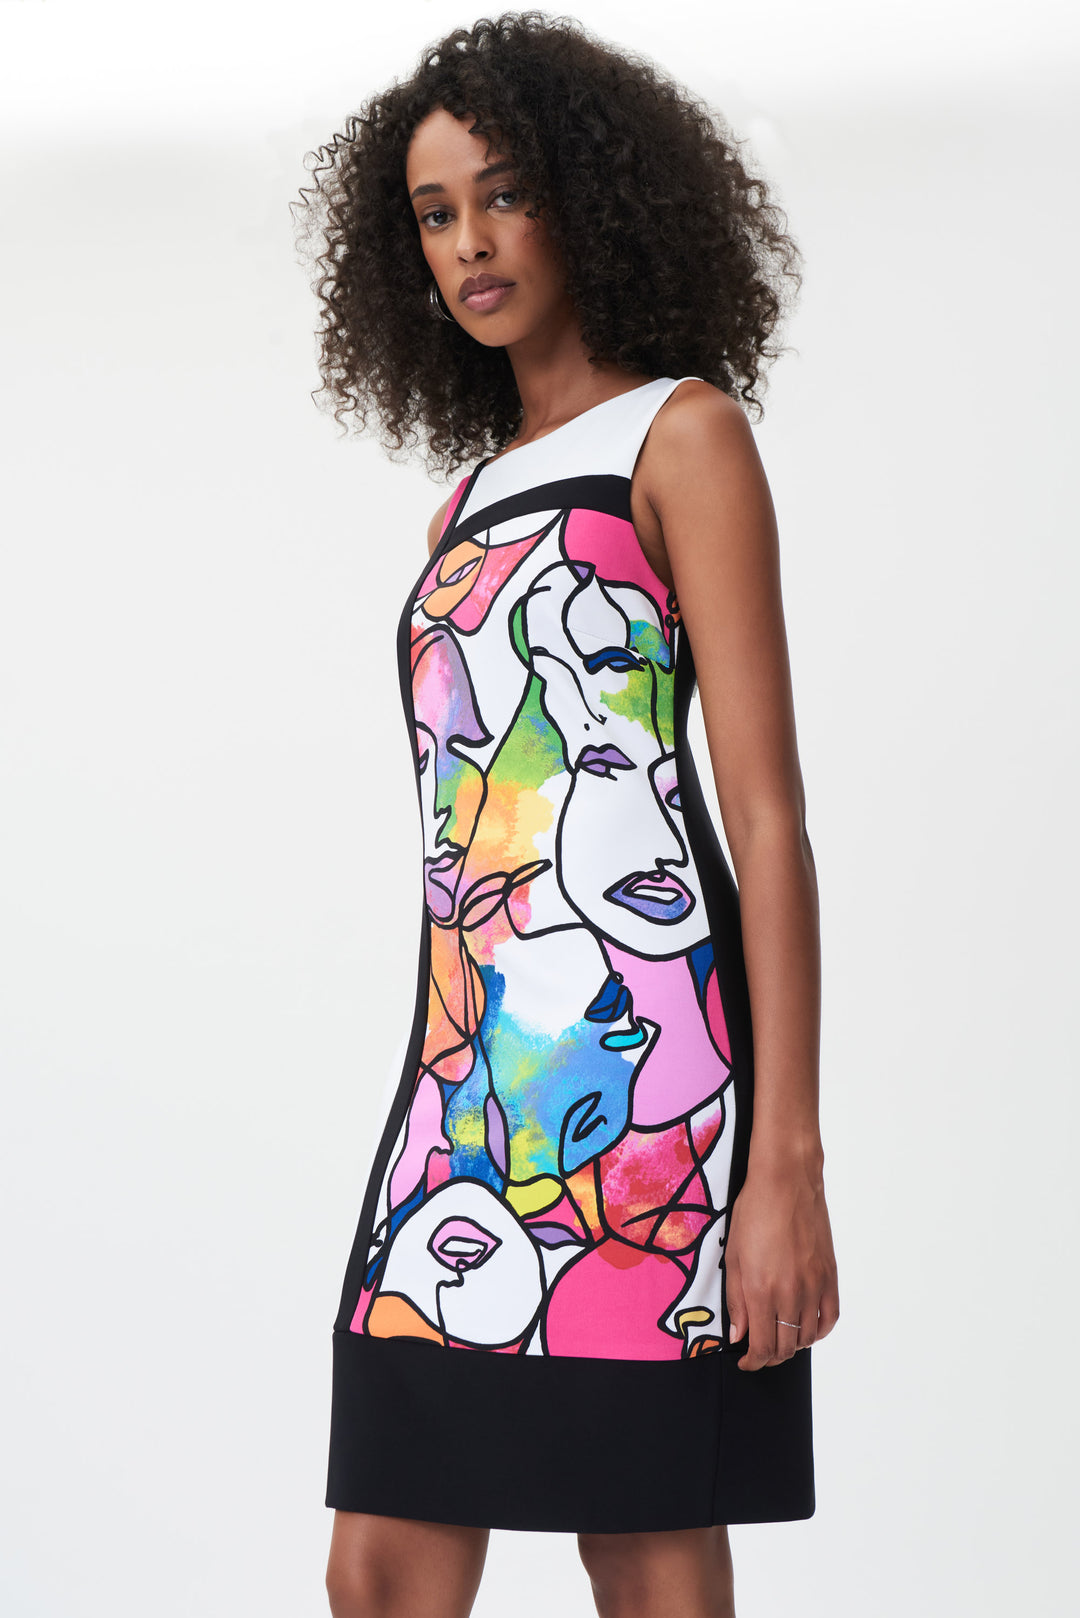 ABSTRACT FACE DRESS